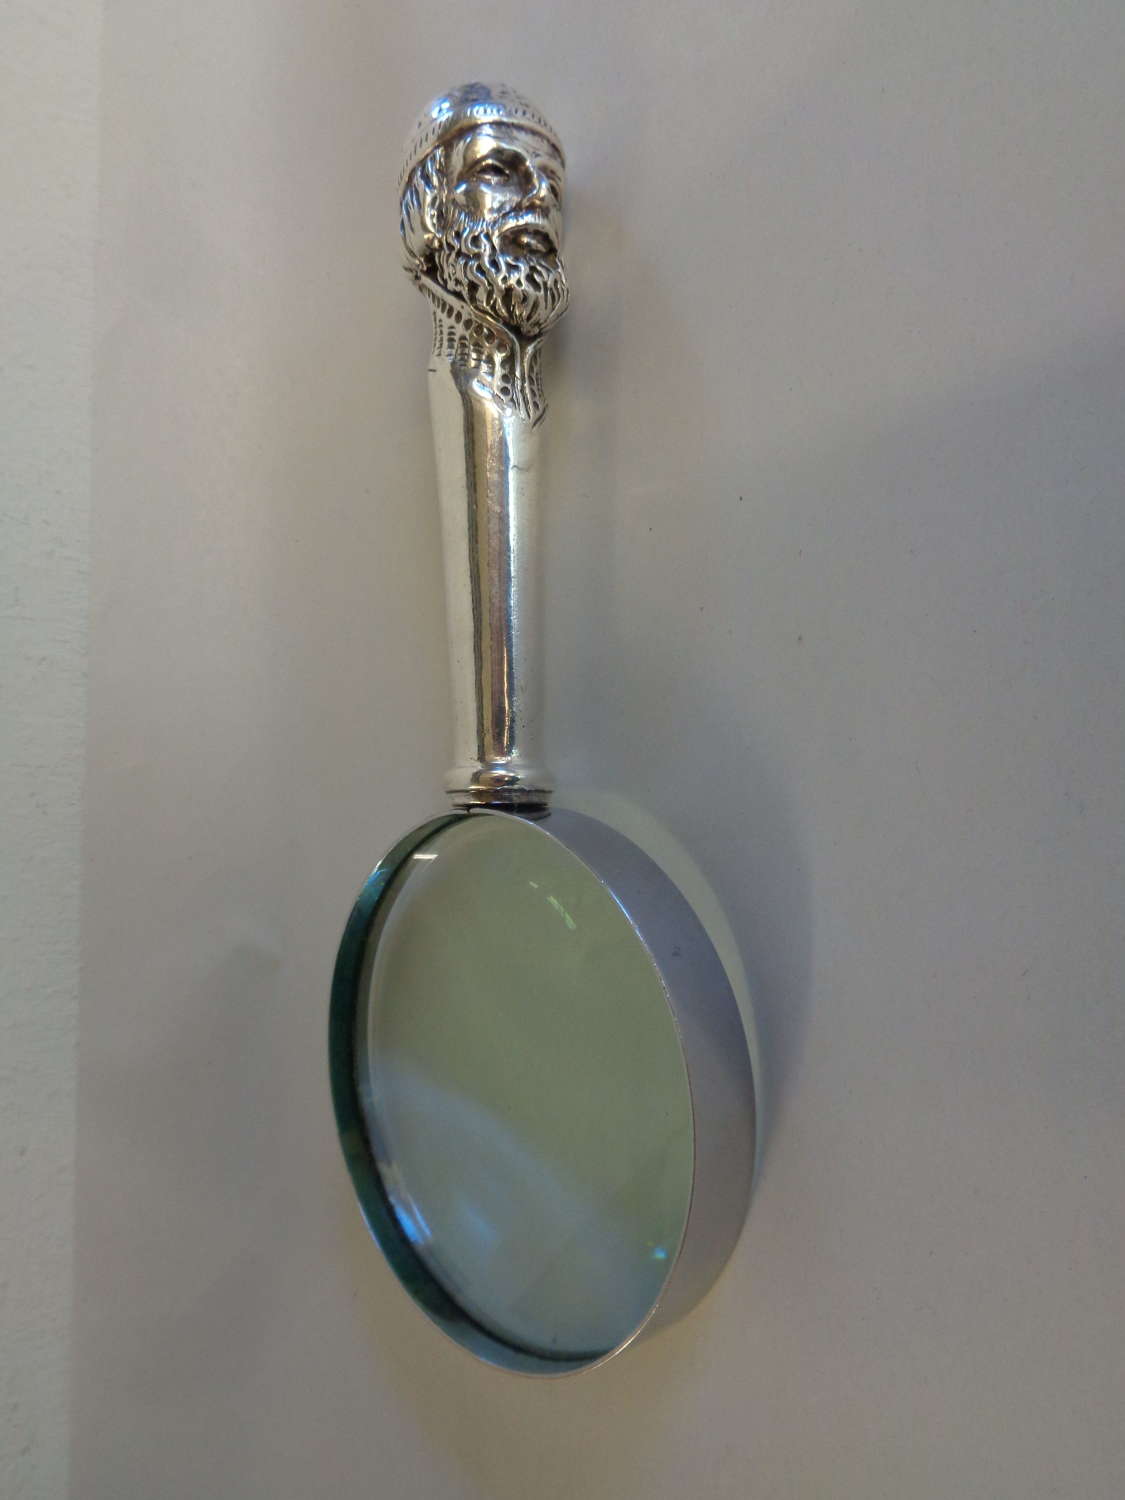 Antique 925 Silver Handled Magnifying Glass